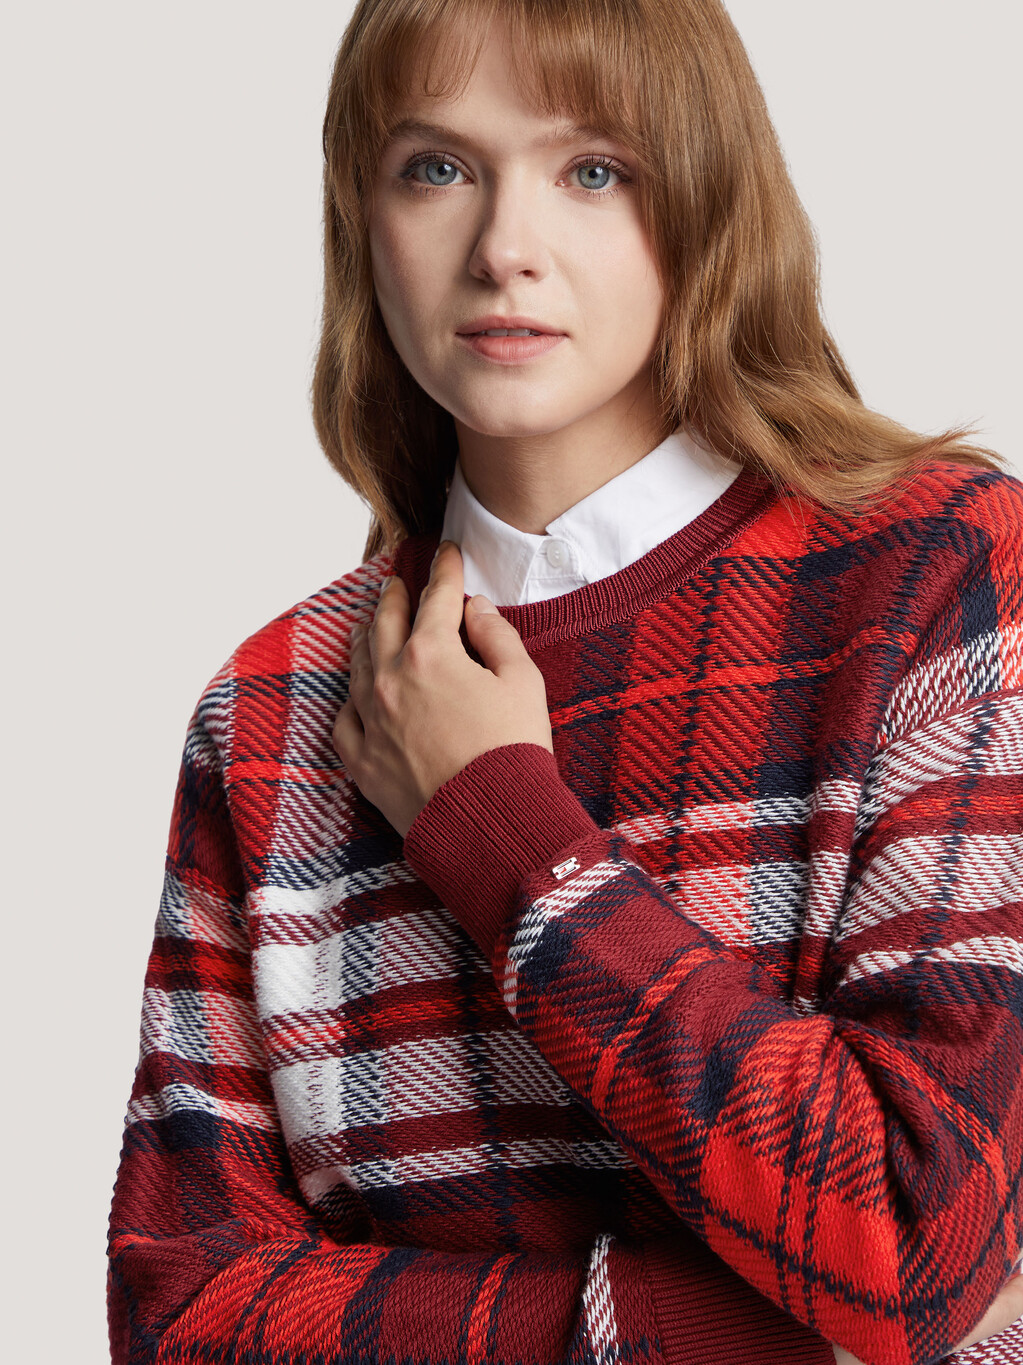 Tartan Relaxed Sweater, Tommy Tartan Rouge L Scale, hi-res